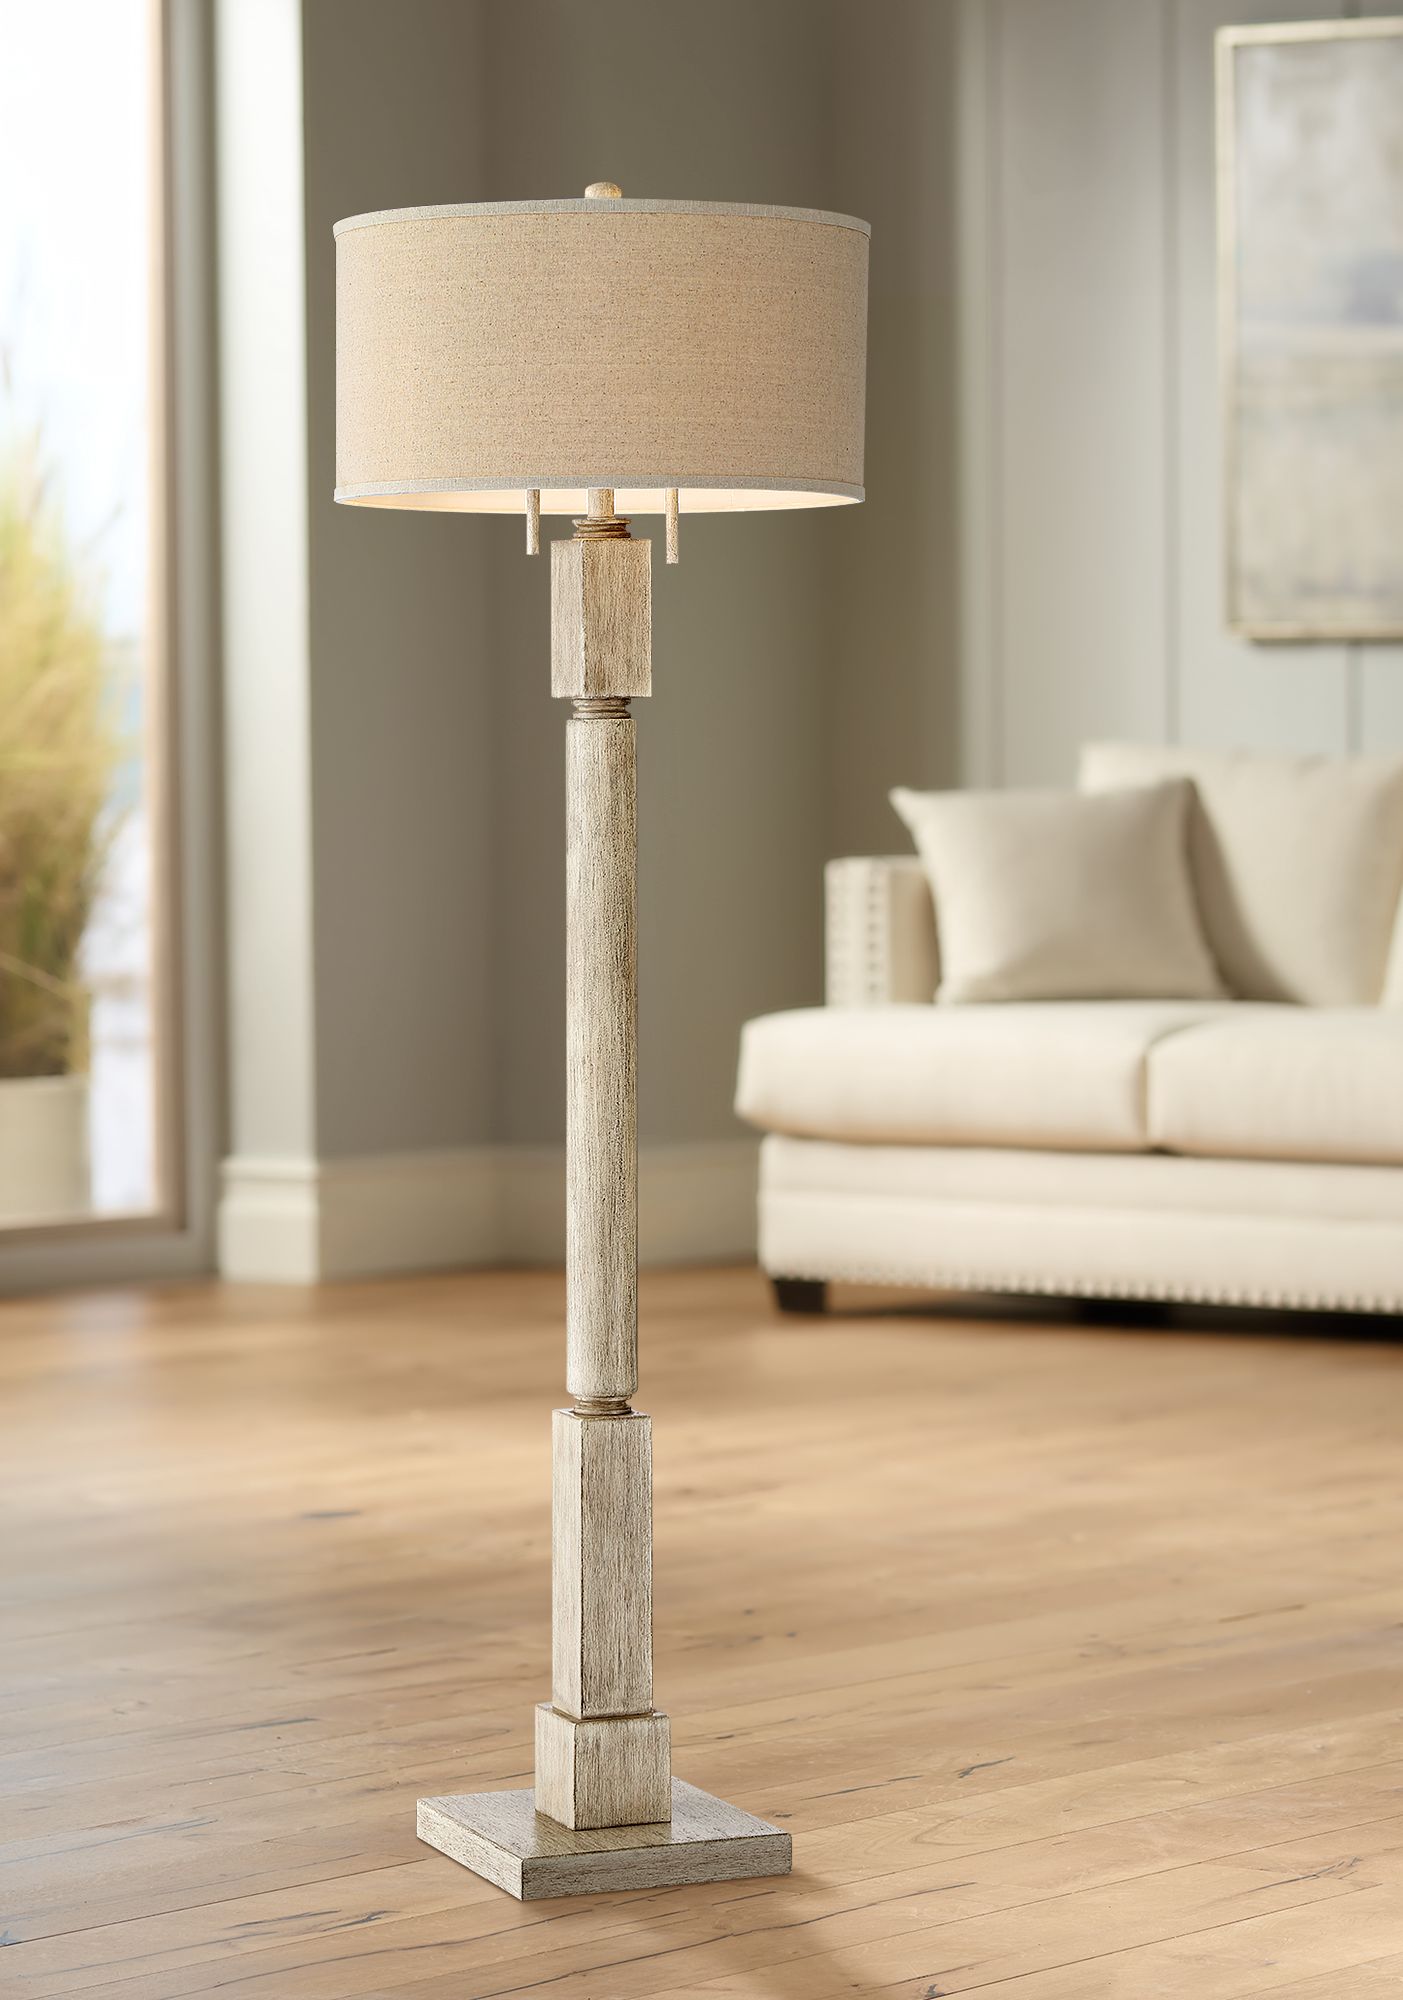 Barnes and Ivy Baluster Country Cottage Floor Lamp 63 1/2" Tall Pickled Wood Oatmeal Linen Drum Shade for Living Room Reading Bedroom Office House - image 1 of 10